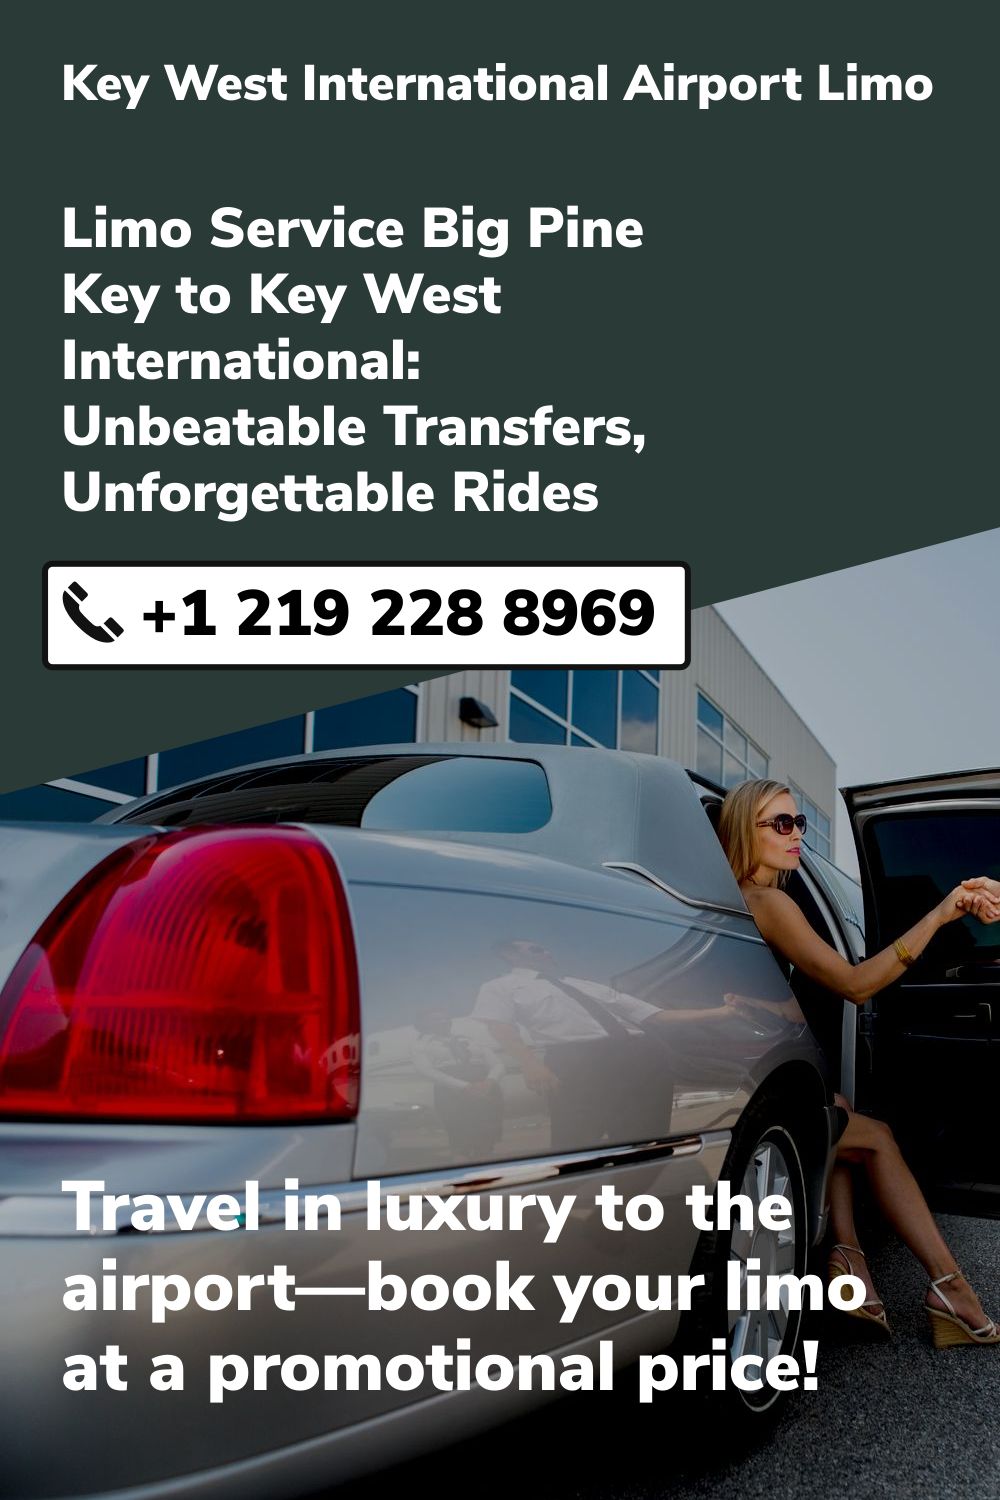 Key West International Airport Limo